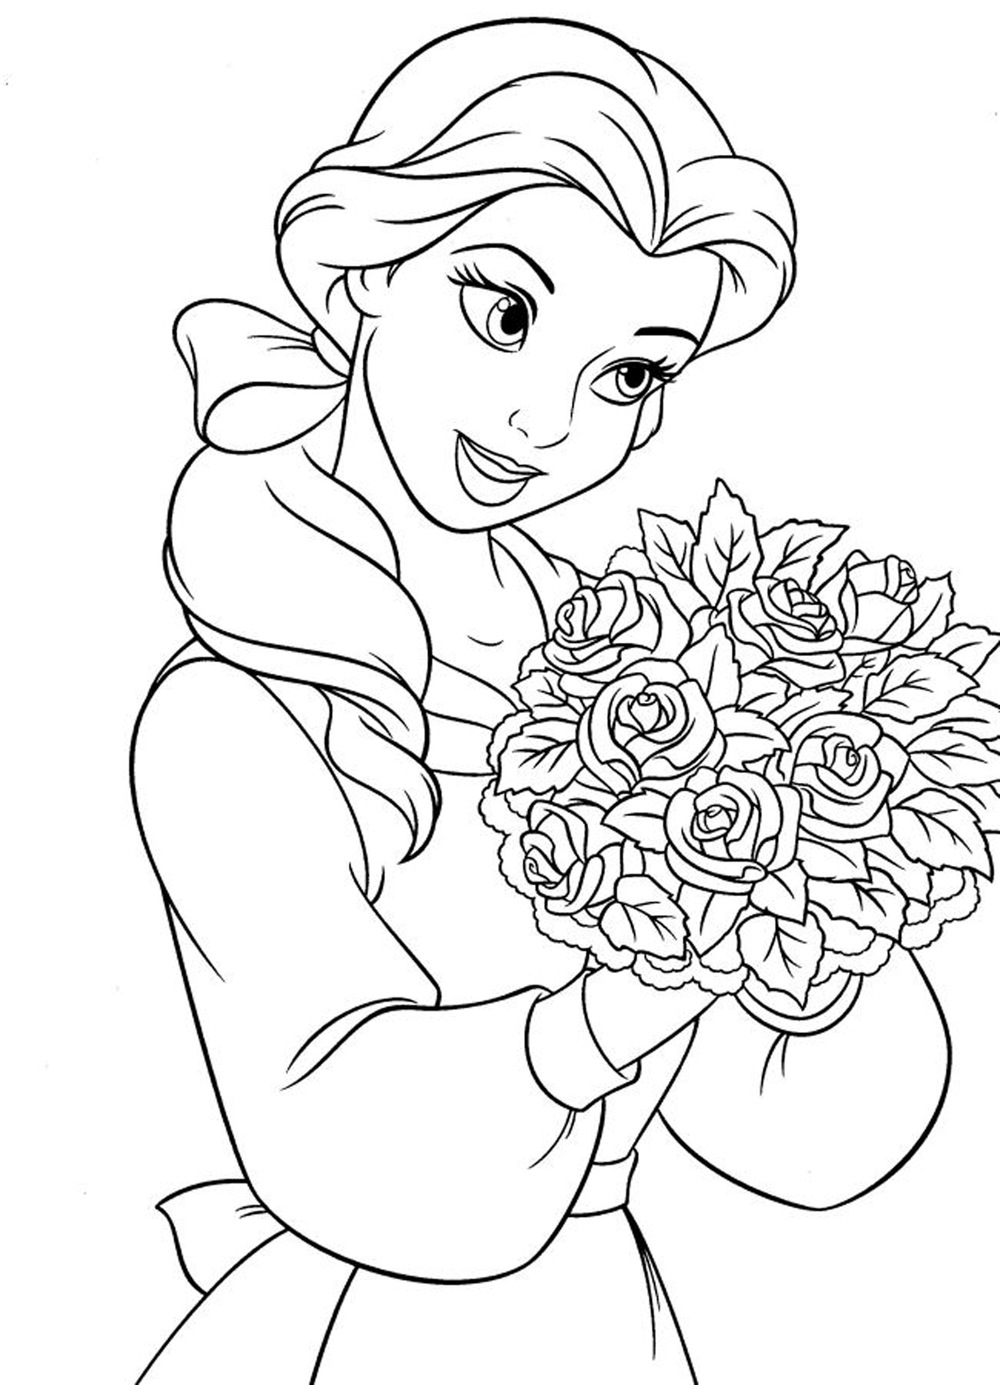 Cute Princess For Girls Coloring Page